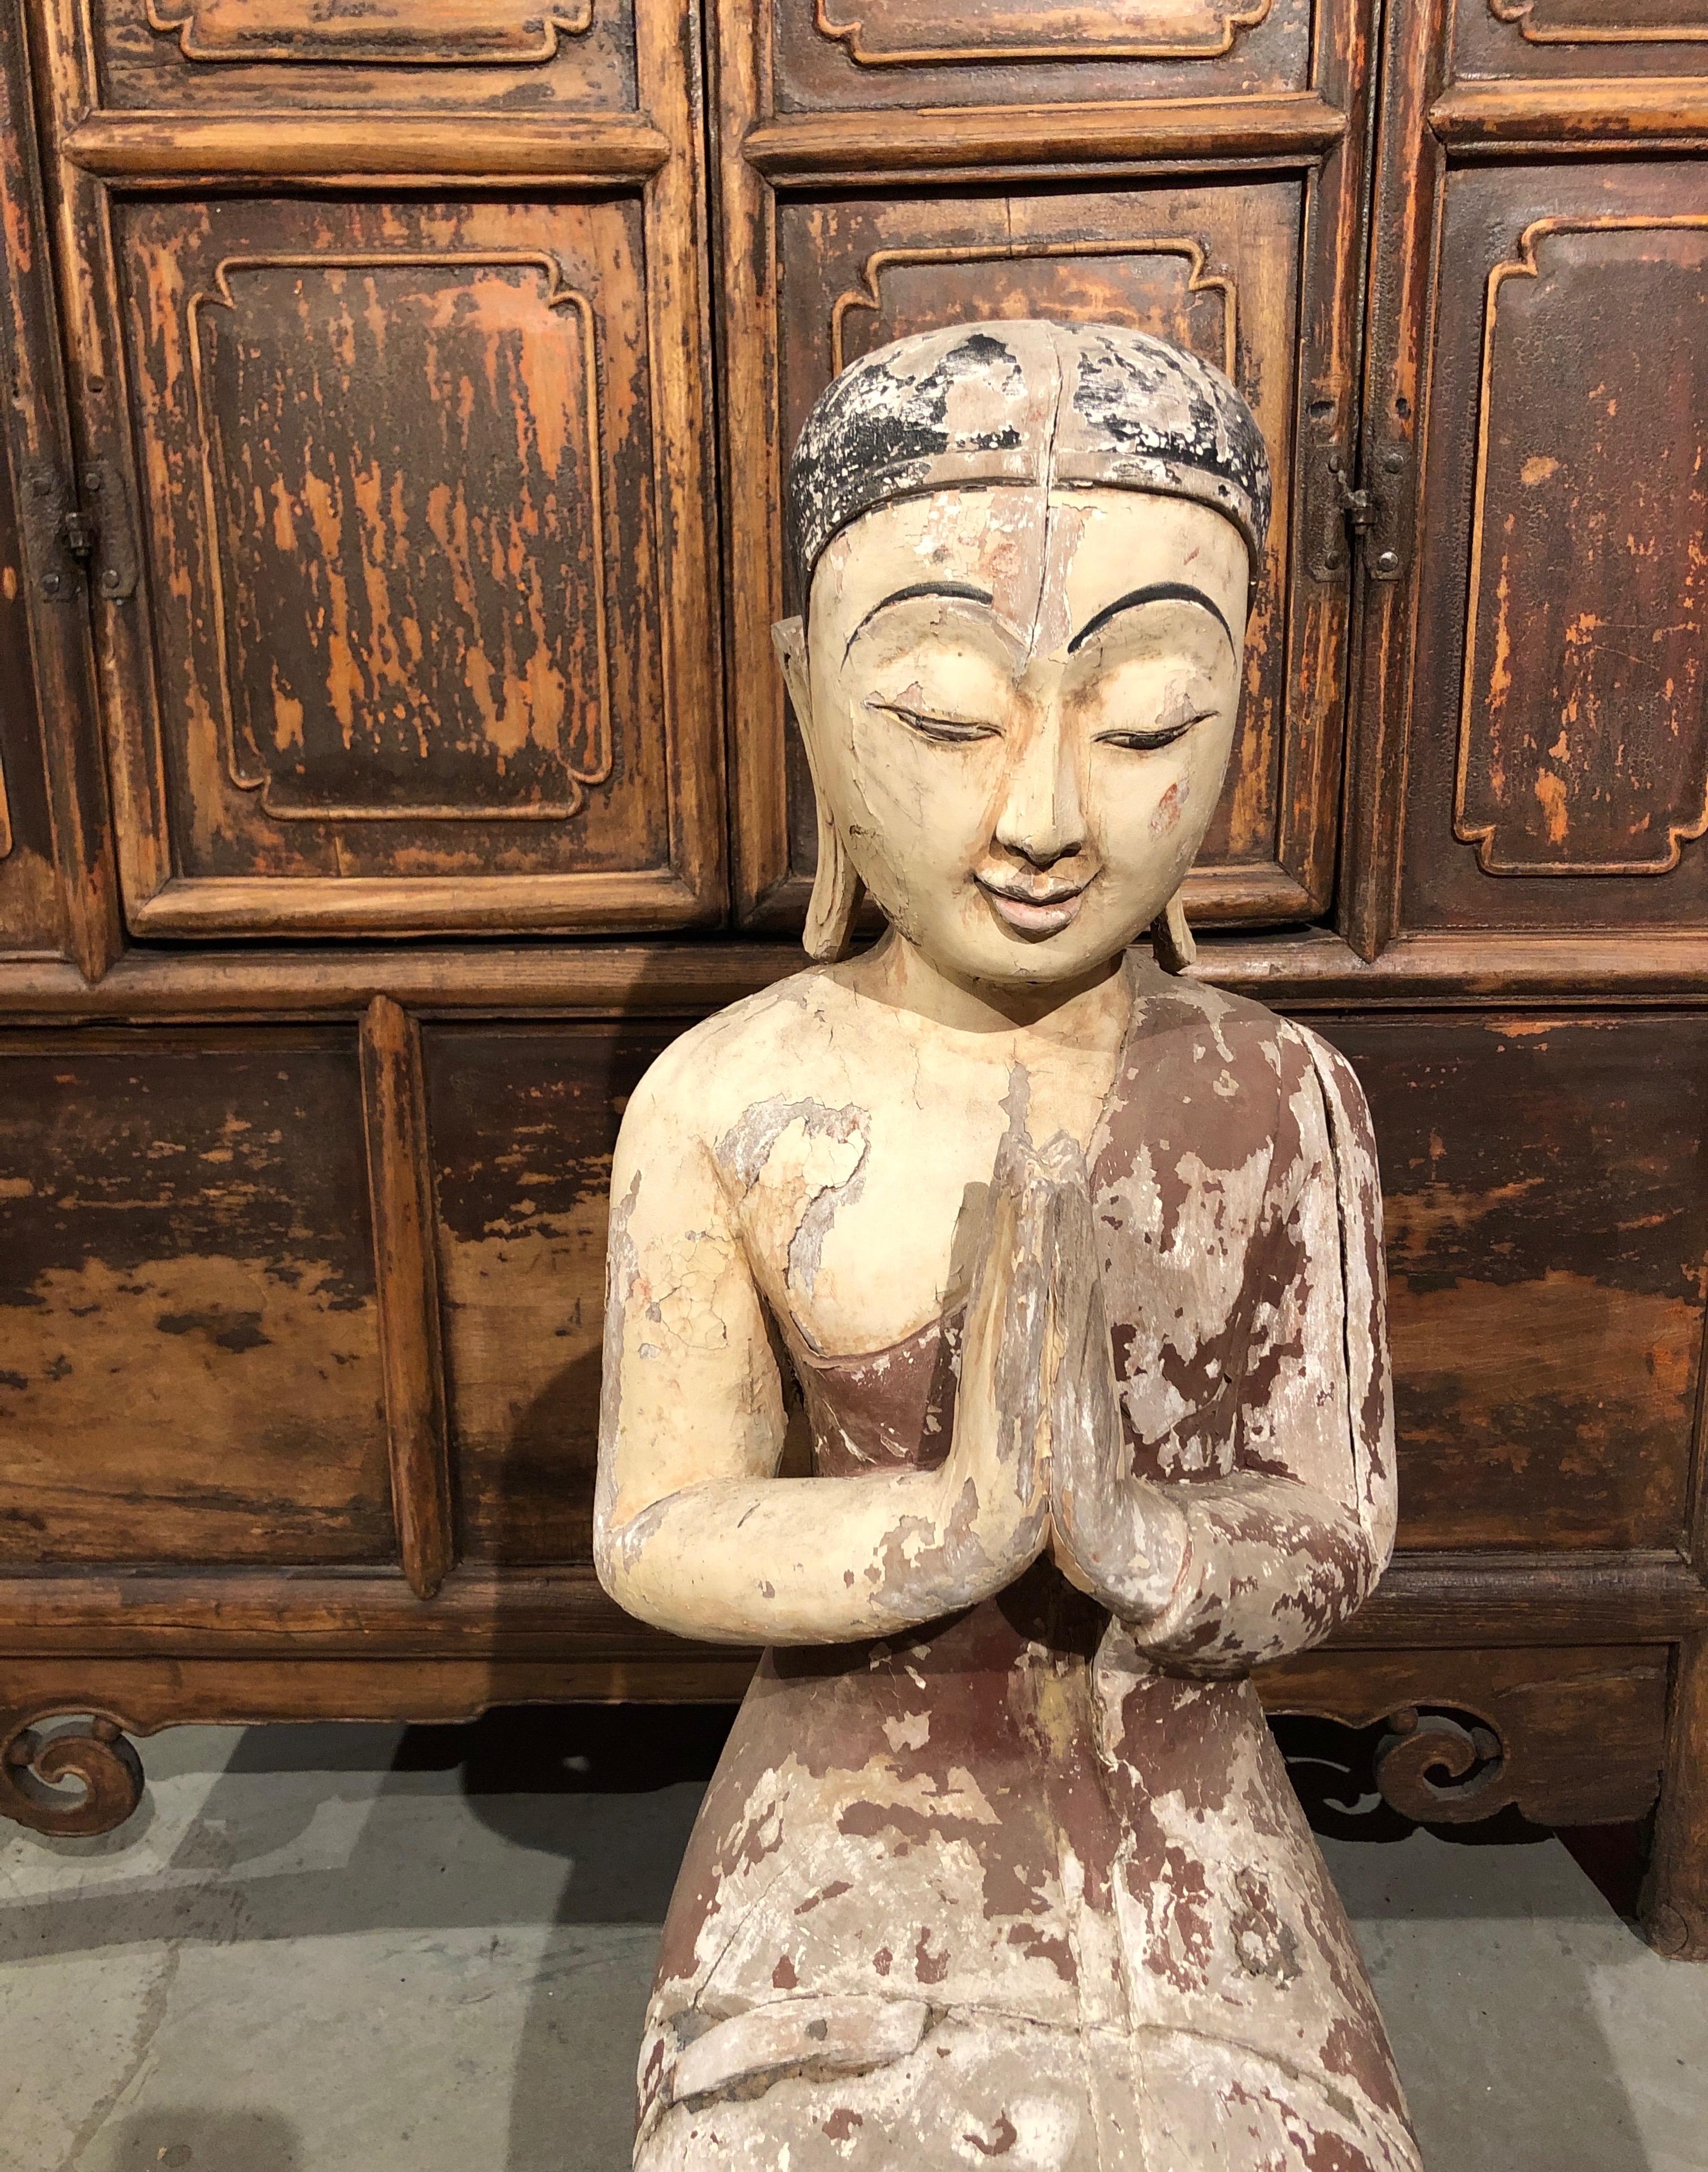 An antique kneeling monk on lotus leaf sitting in a praying position. From a Burmese Buddhist Temple. This well carved teak monk features attractive remnants of faded original paint and a striking aged patina from years in the sun. A truly evocative